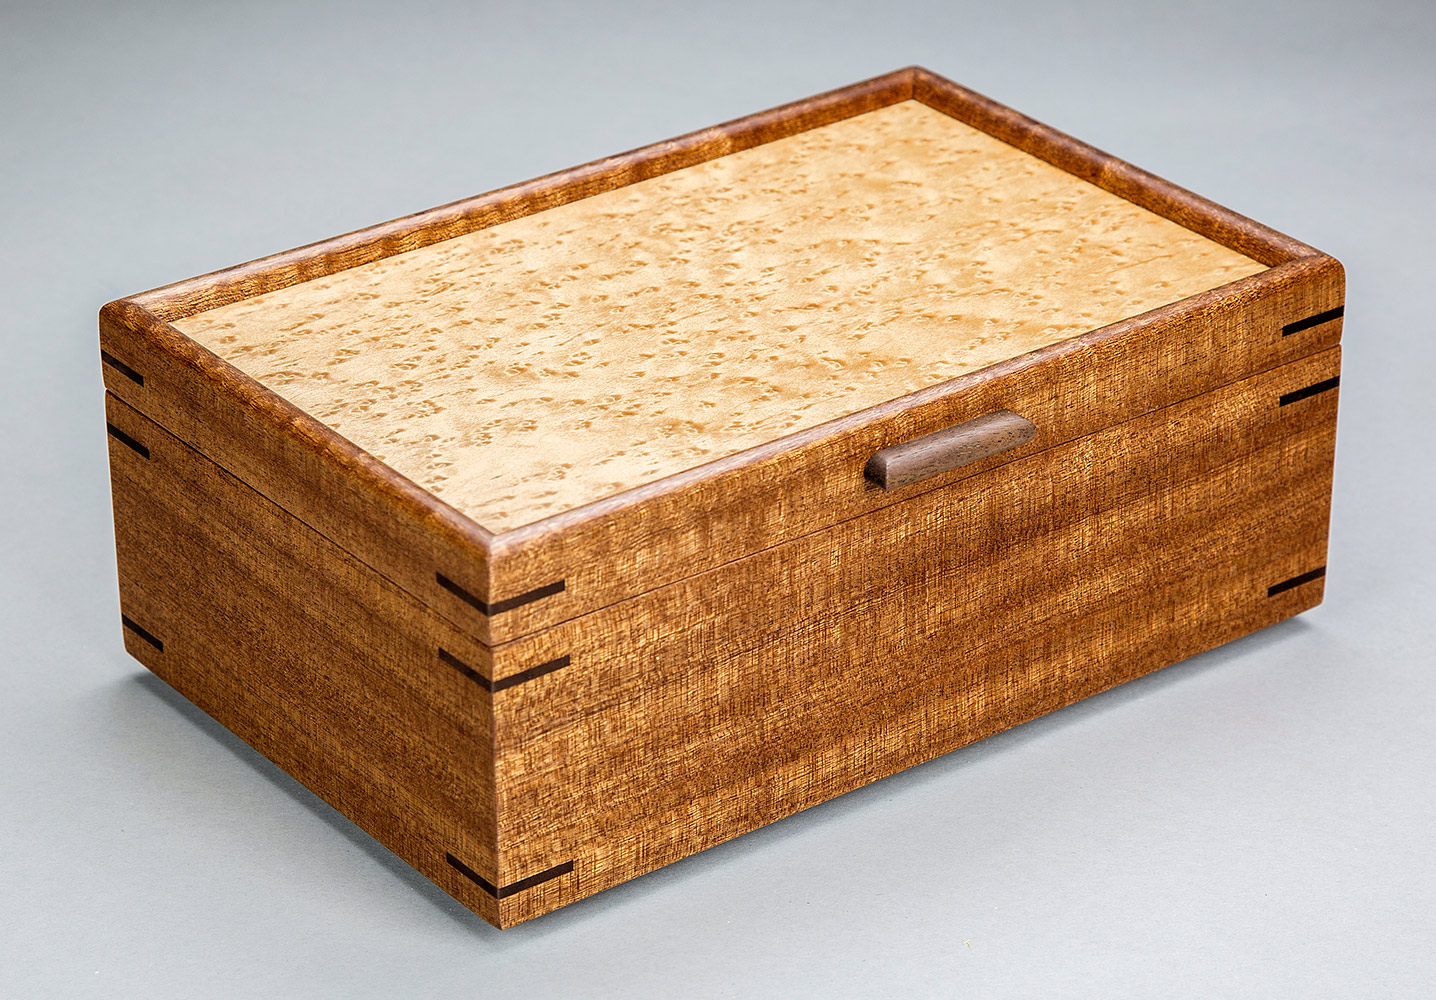 Woodworking Class: Build a Jewelry Box – Woodworkers ...